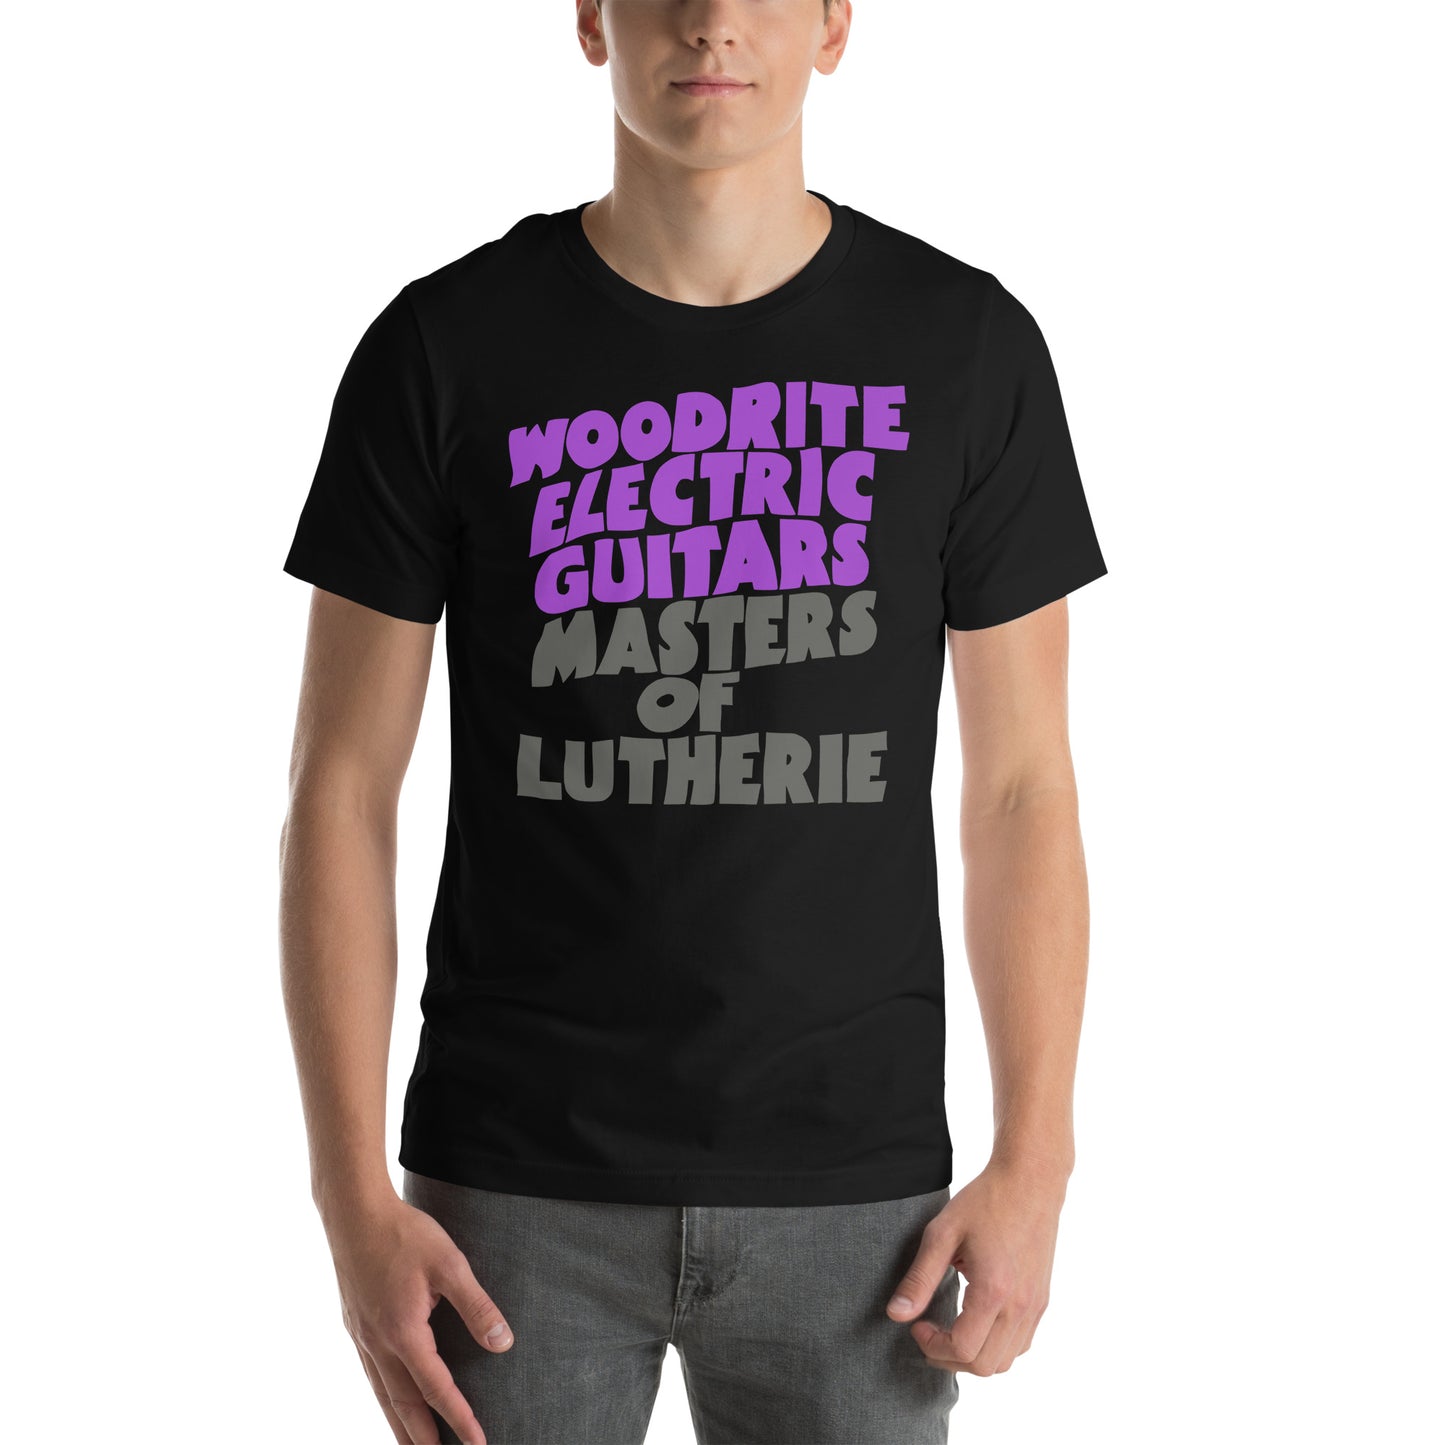 Woodrite Masters Of Lutherie T-Shirt